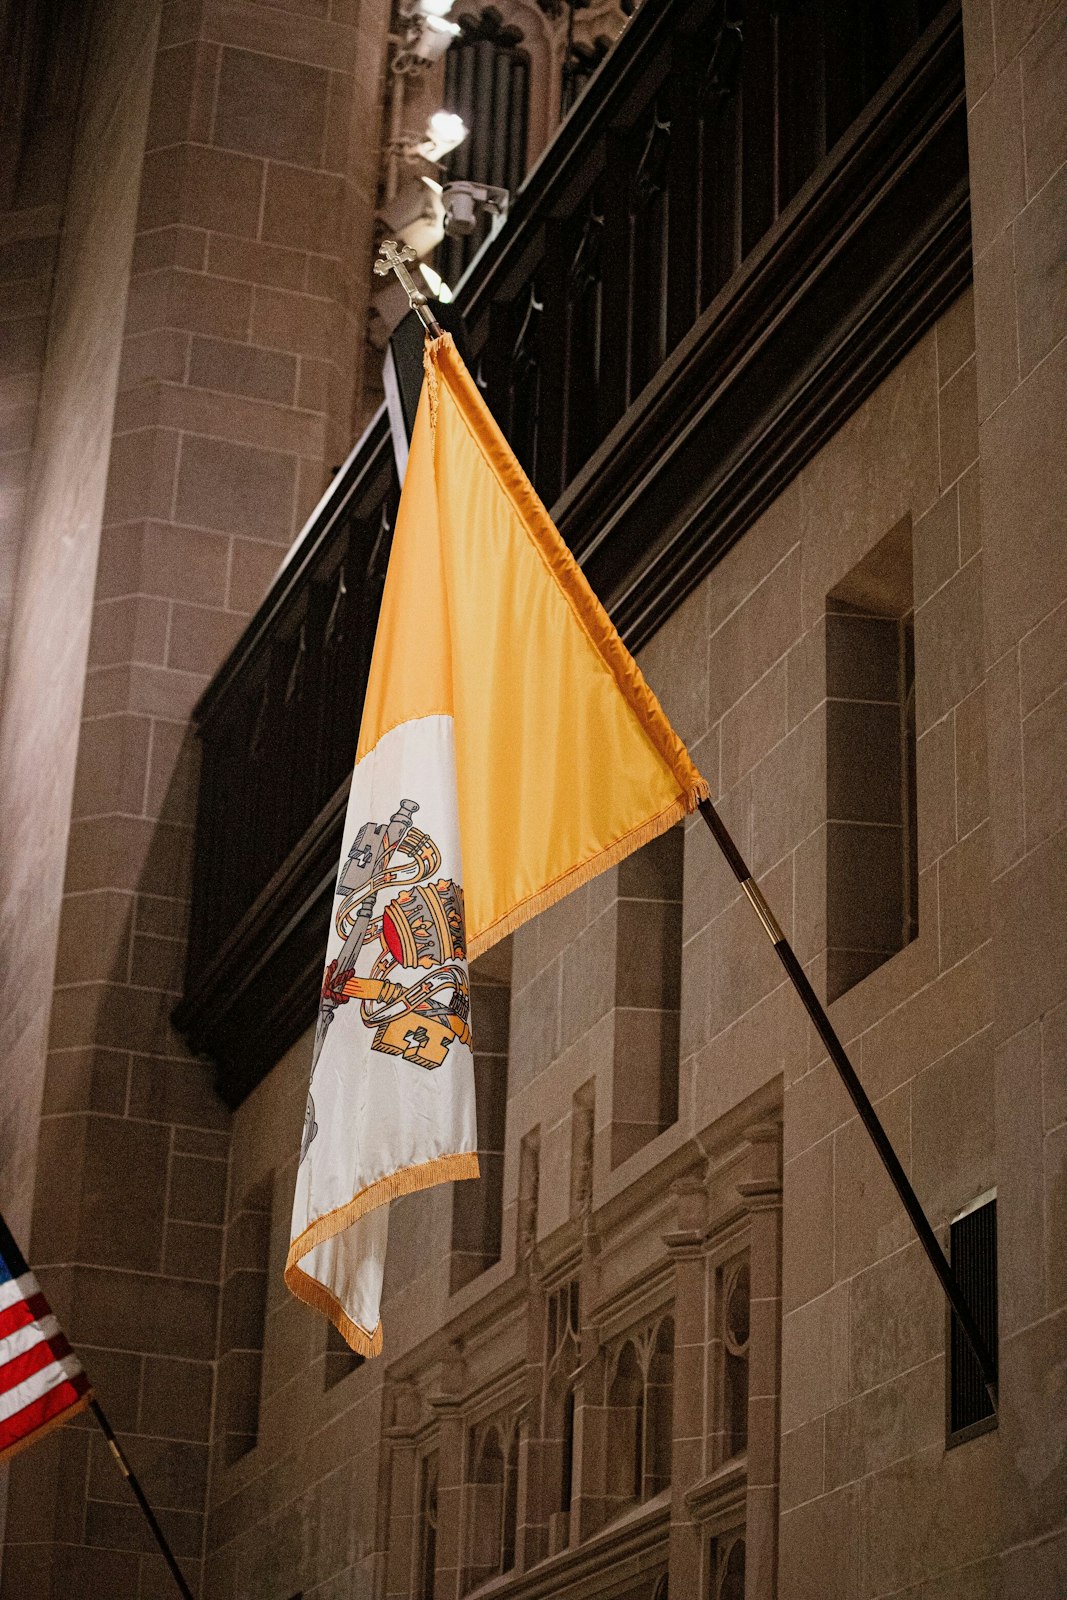 The Vatican flag is pictured hanging in the back of the Cathedral of the Most Blessed Sacrament. Pope Benedict XVI's life was first and foremost about following Jesus as a disciple, friend and beloved son.